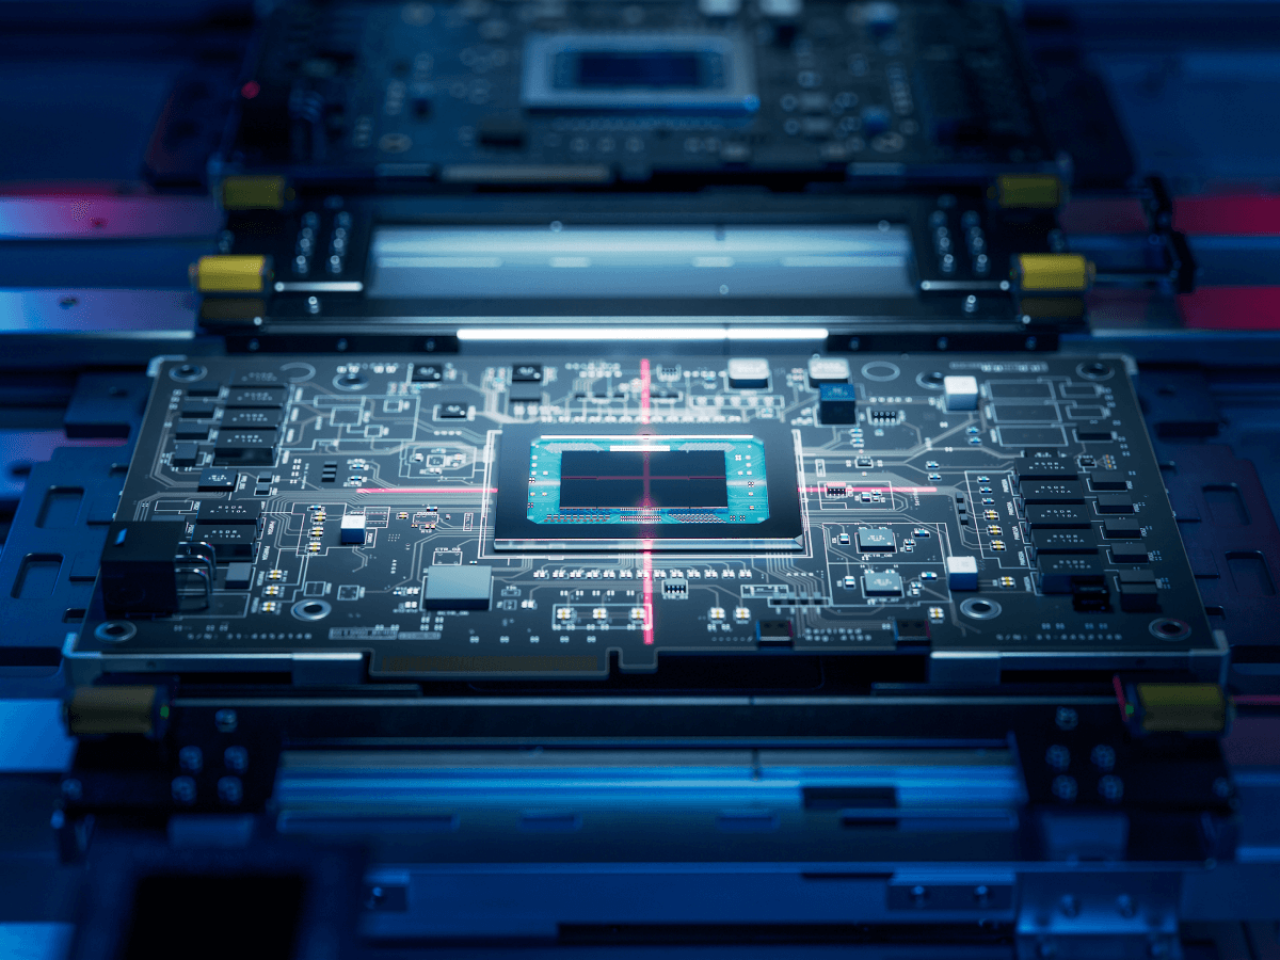 A graphics processing unit can take many shapes and sizes, but one thing stays the same: the need for fast connectivity.